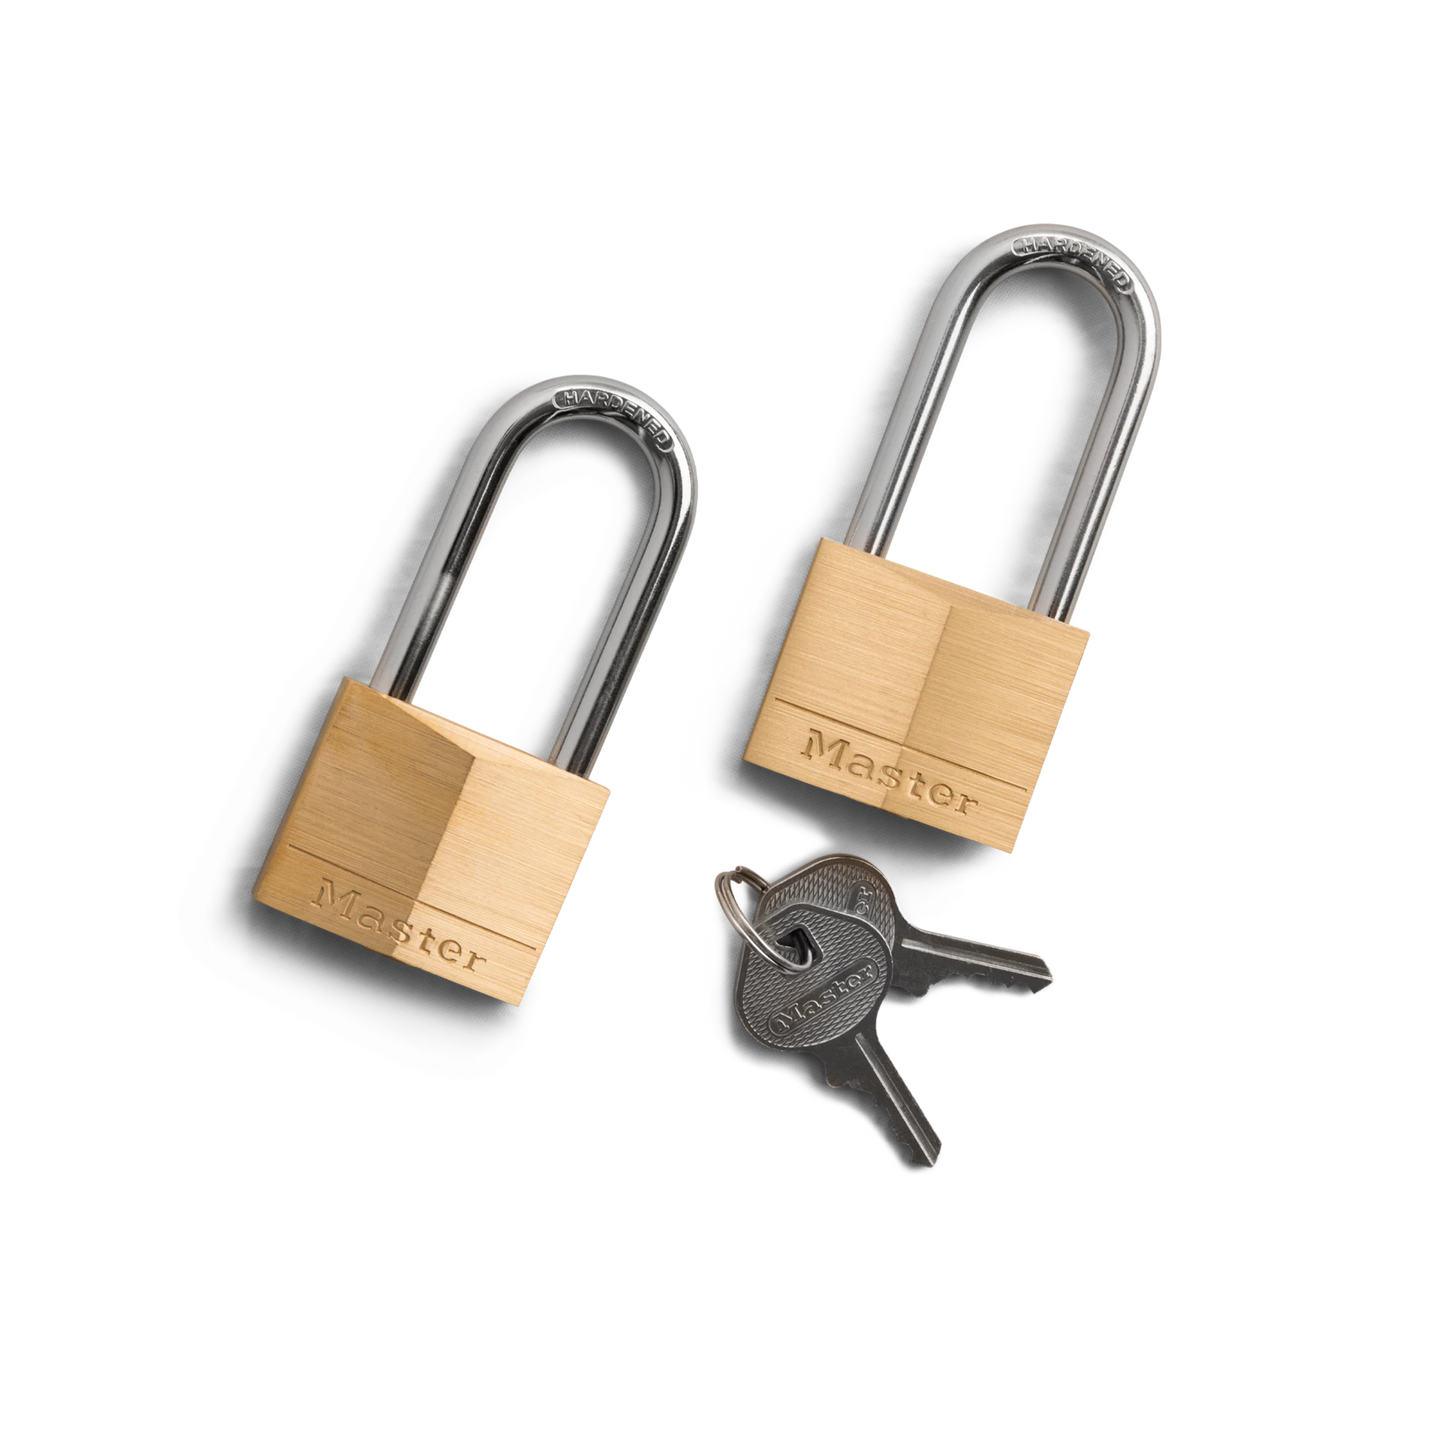 Bear-Proof Lock Two-Pack